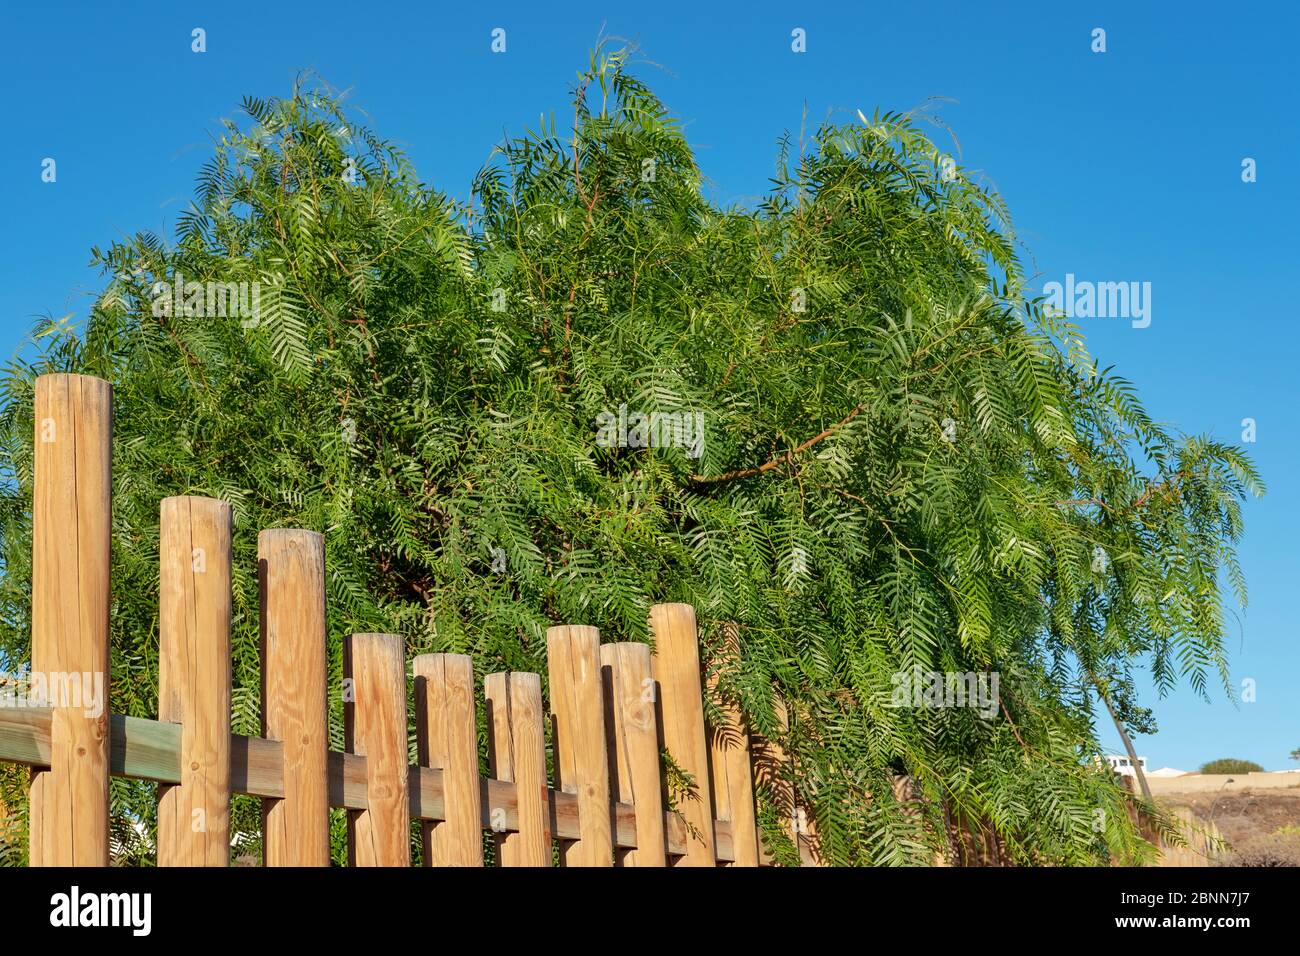 Schinus molle, also known as Peruvian pepper or false pepper tree growing over a wooden fence, ornamental evergreen tree with pink peppercorns Stock Photo